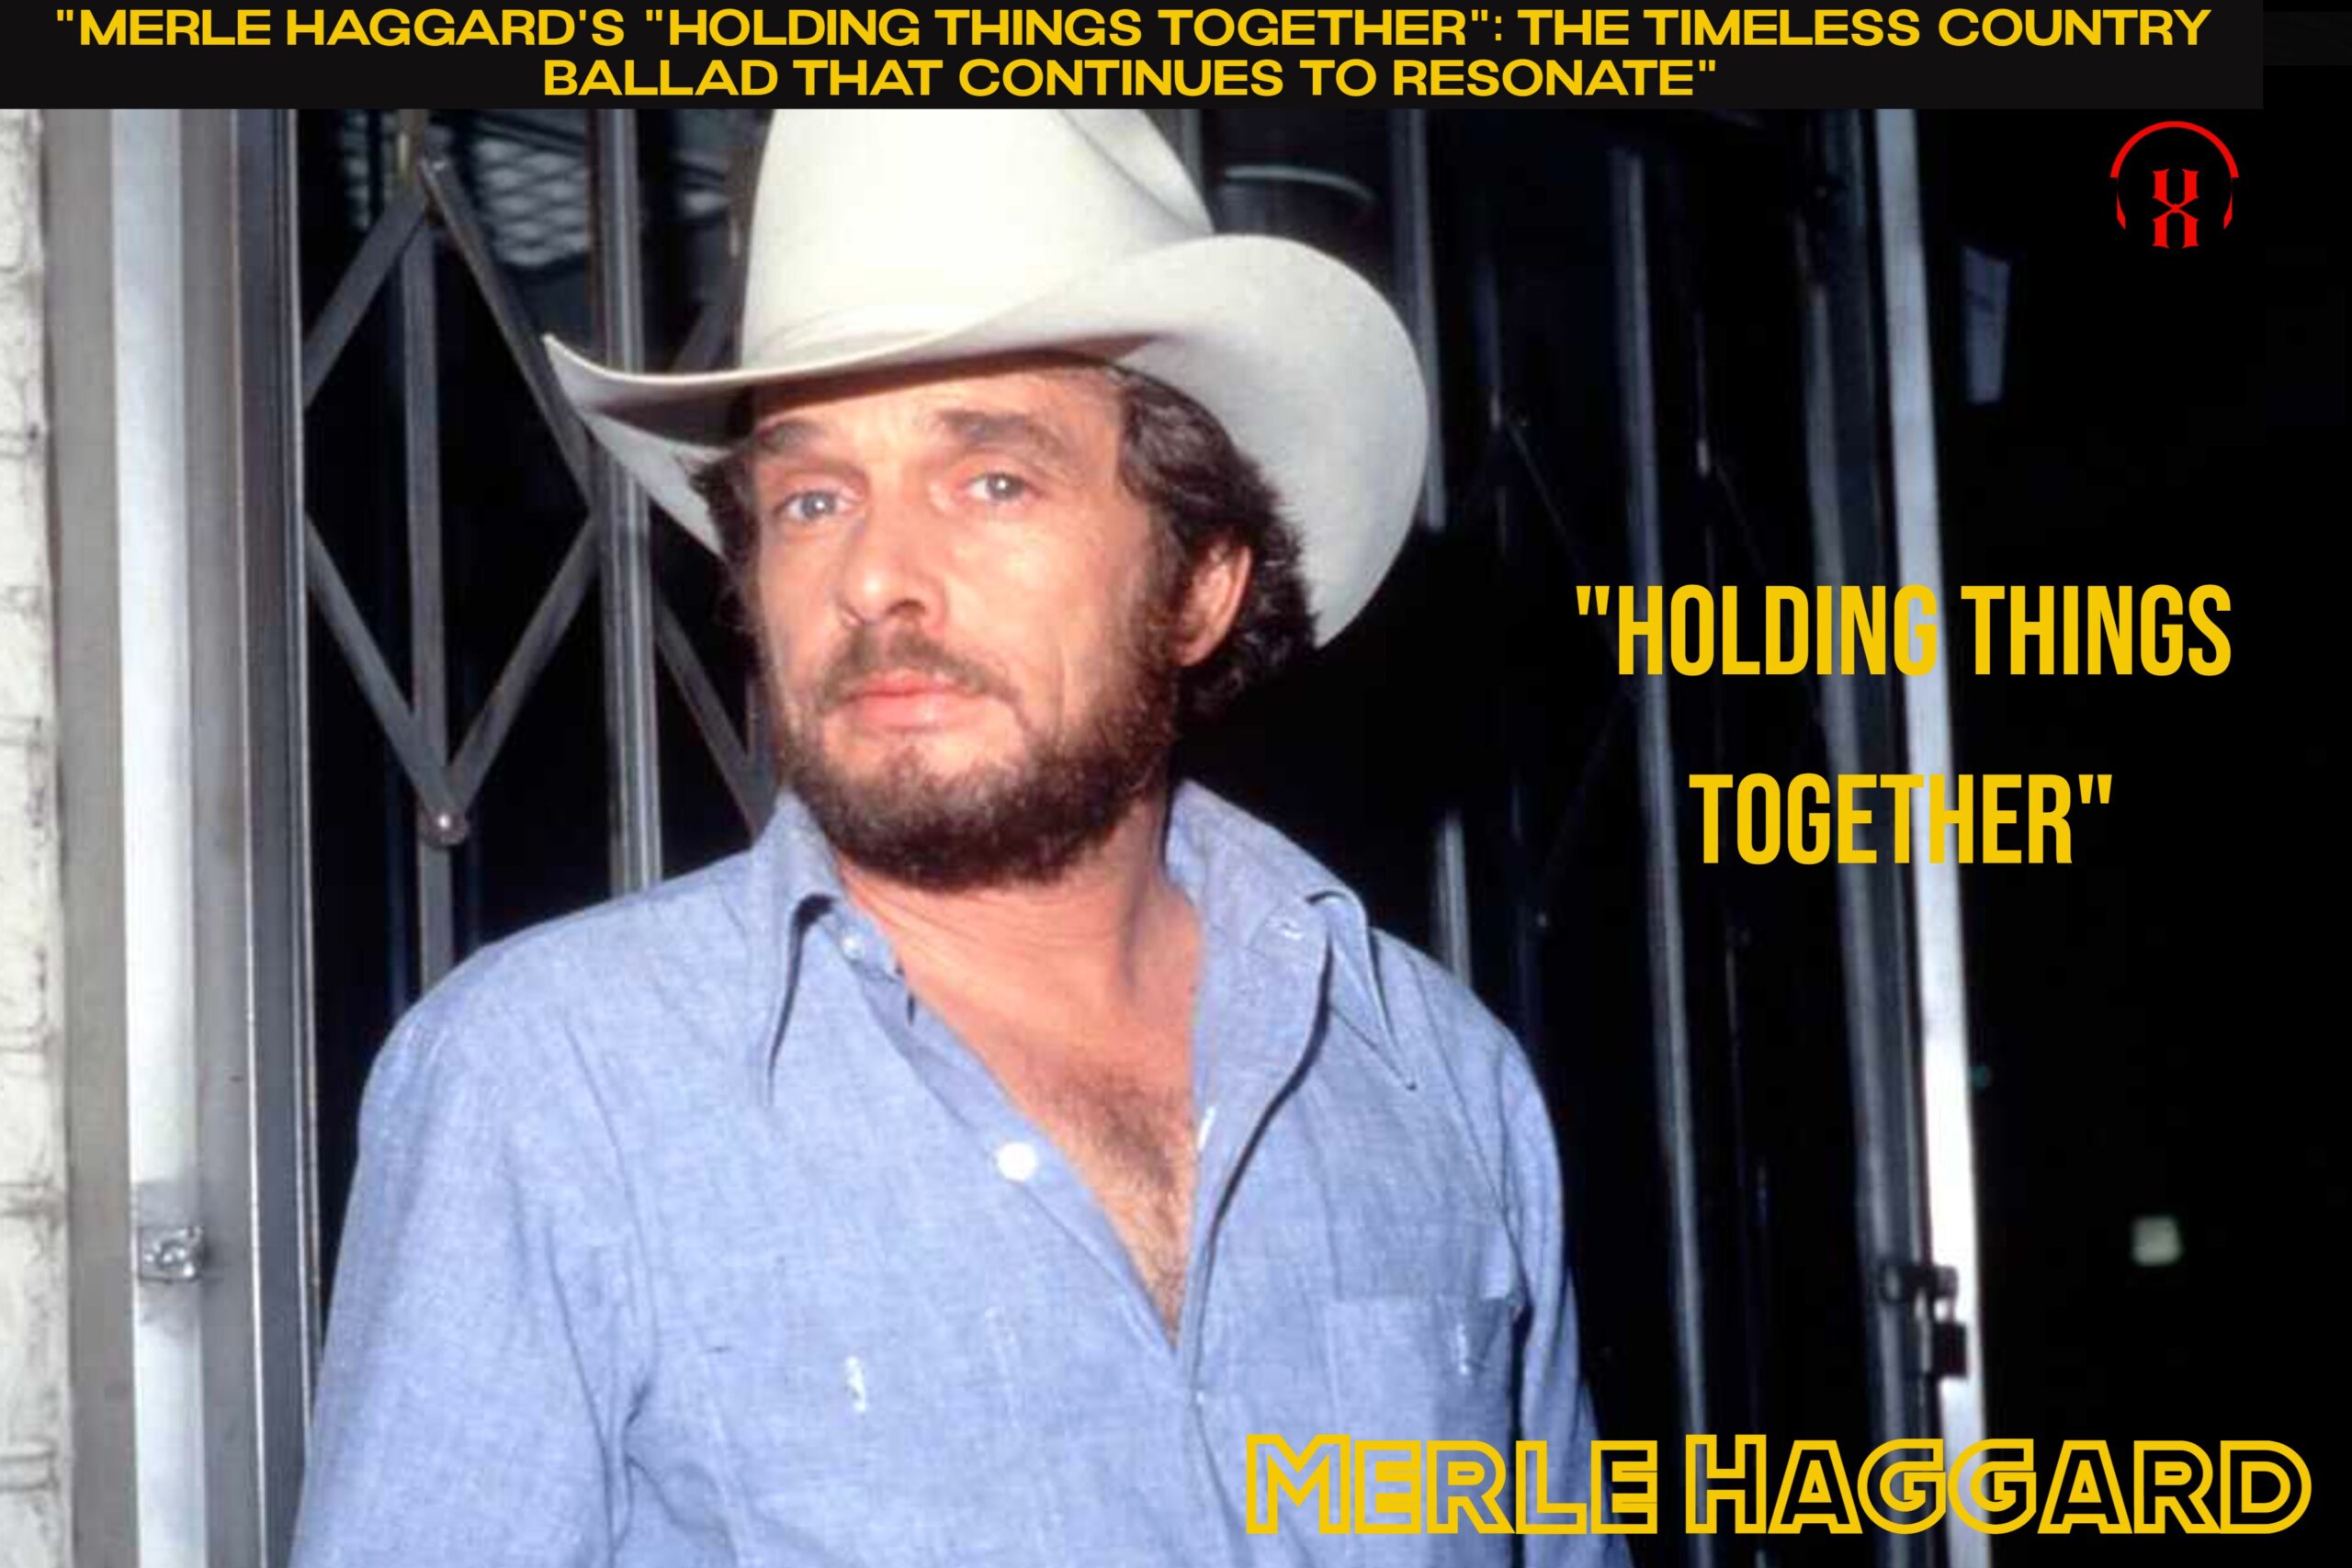 “Merle Haggard’s “Holding Things Together”: The Timeless Country Ballad That Continues to Resonate”